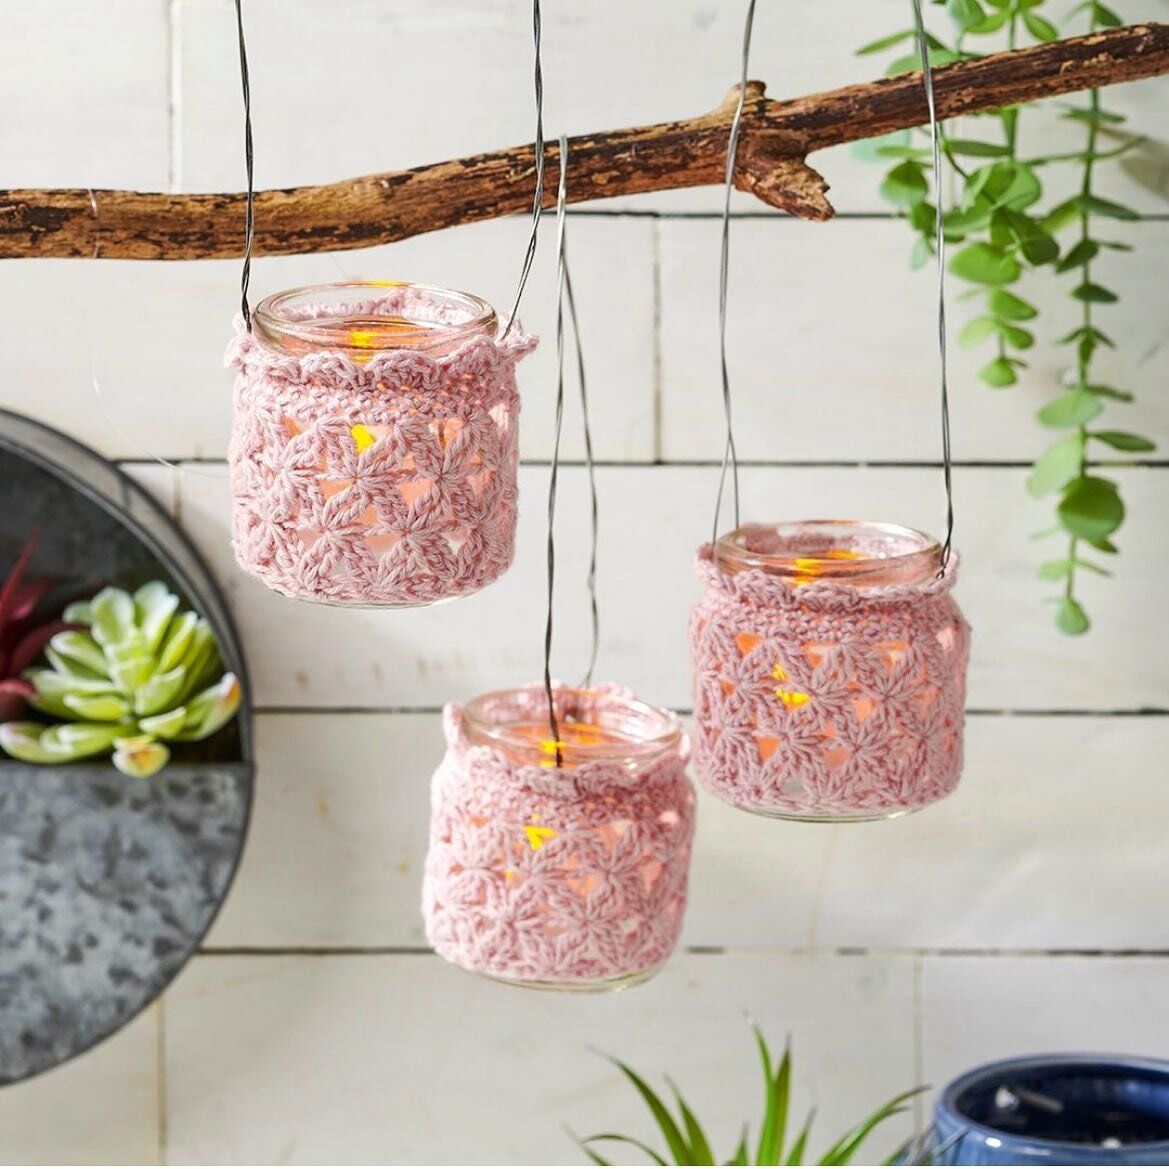 Simple and effective! These little tea light covers can be made to fit any size jar and are speedy to make&hellip; perfect for that wedding reception or garden party! 

Pattern is in issue 123 of @simplycrochetmag 
Yarn: @gorgeousyarns Cochenille 
Ph